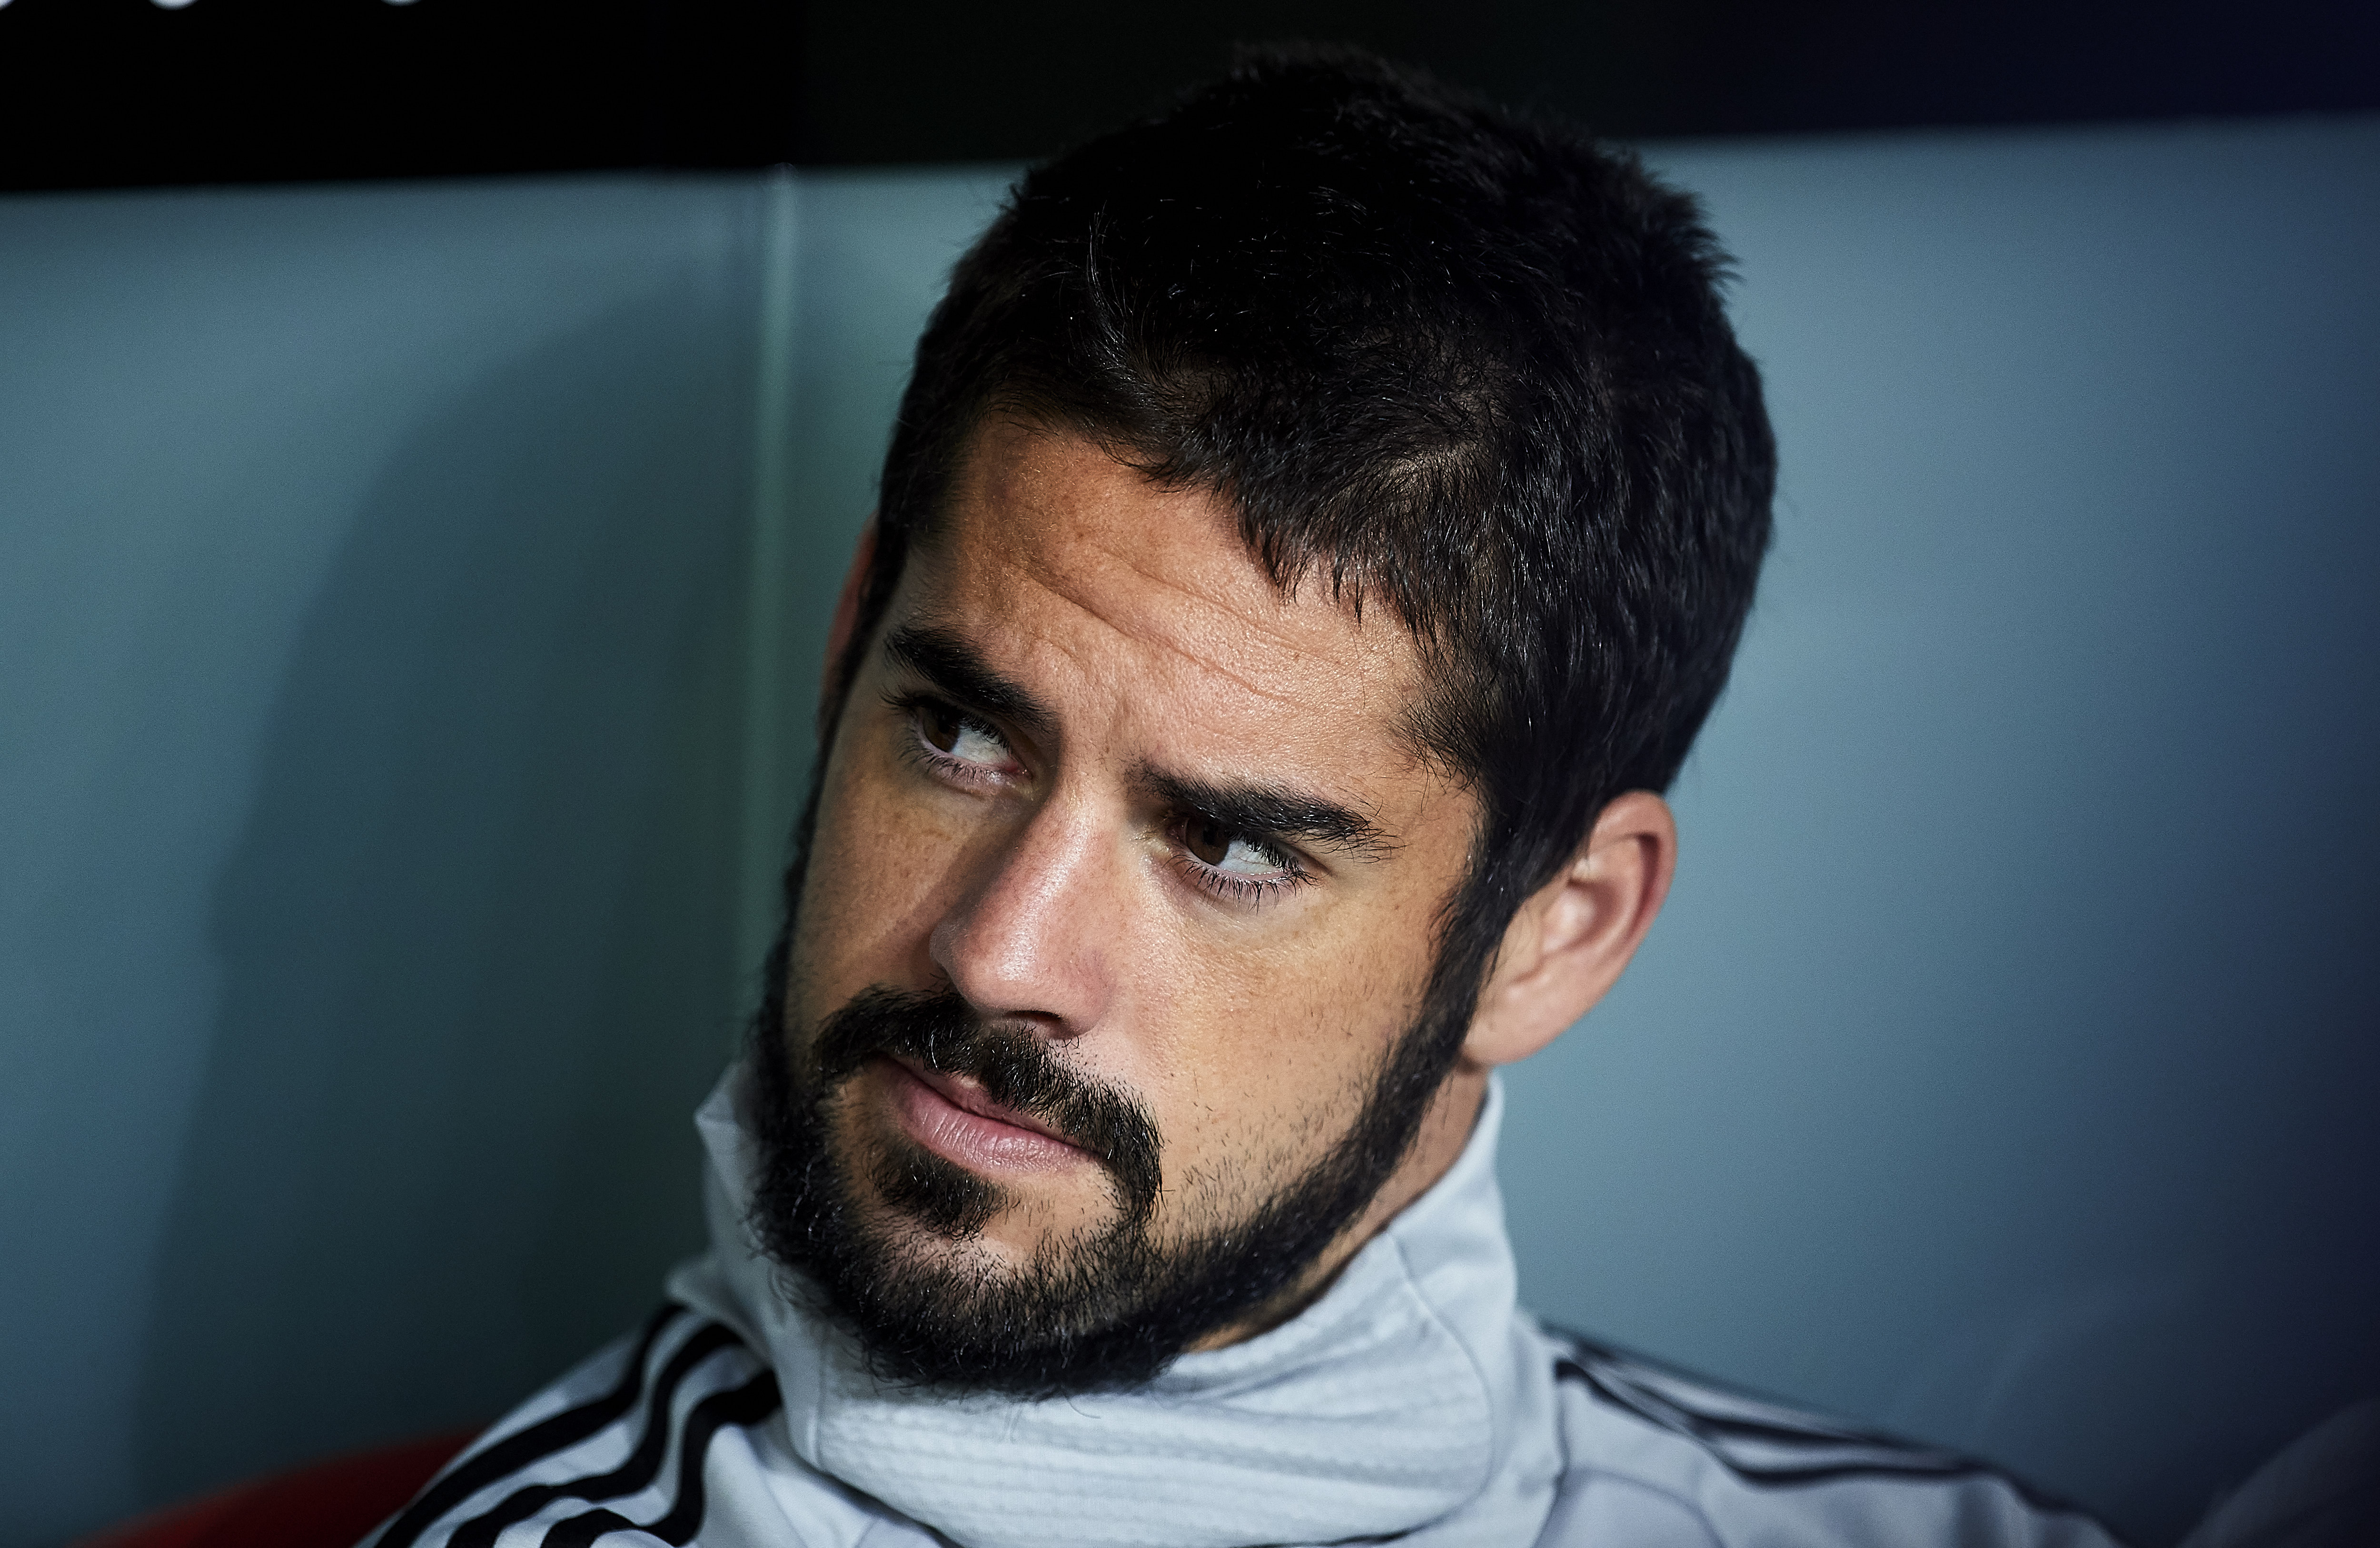 Frustrated by his time on the bench, Isco ought to leave Real Madrid. (Photo by Juan Manuel Serrano Arce/Getty Images)